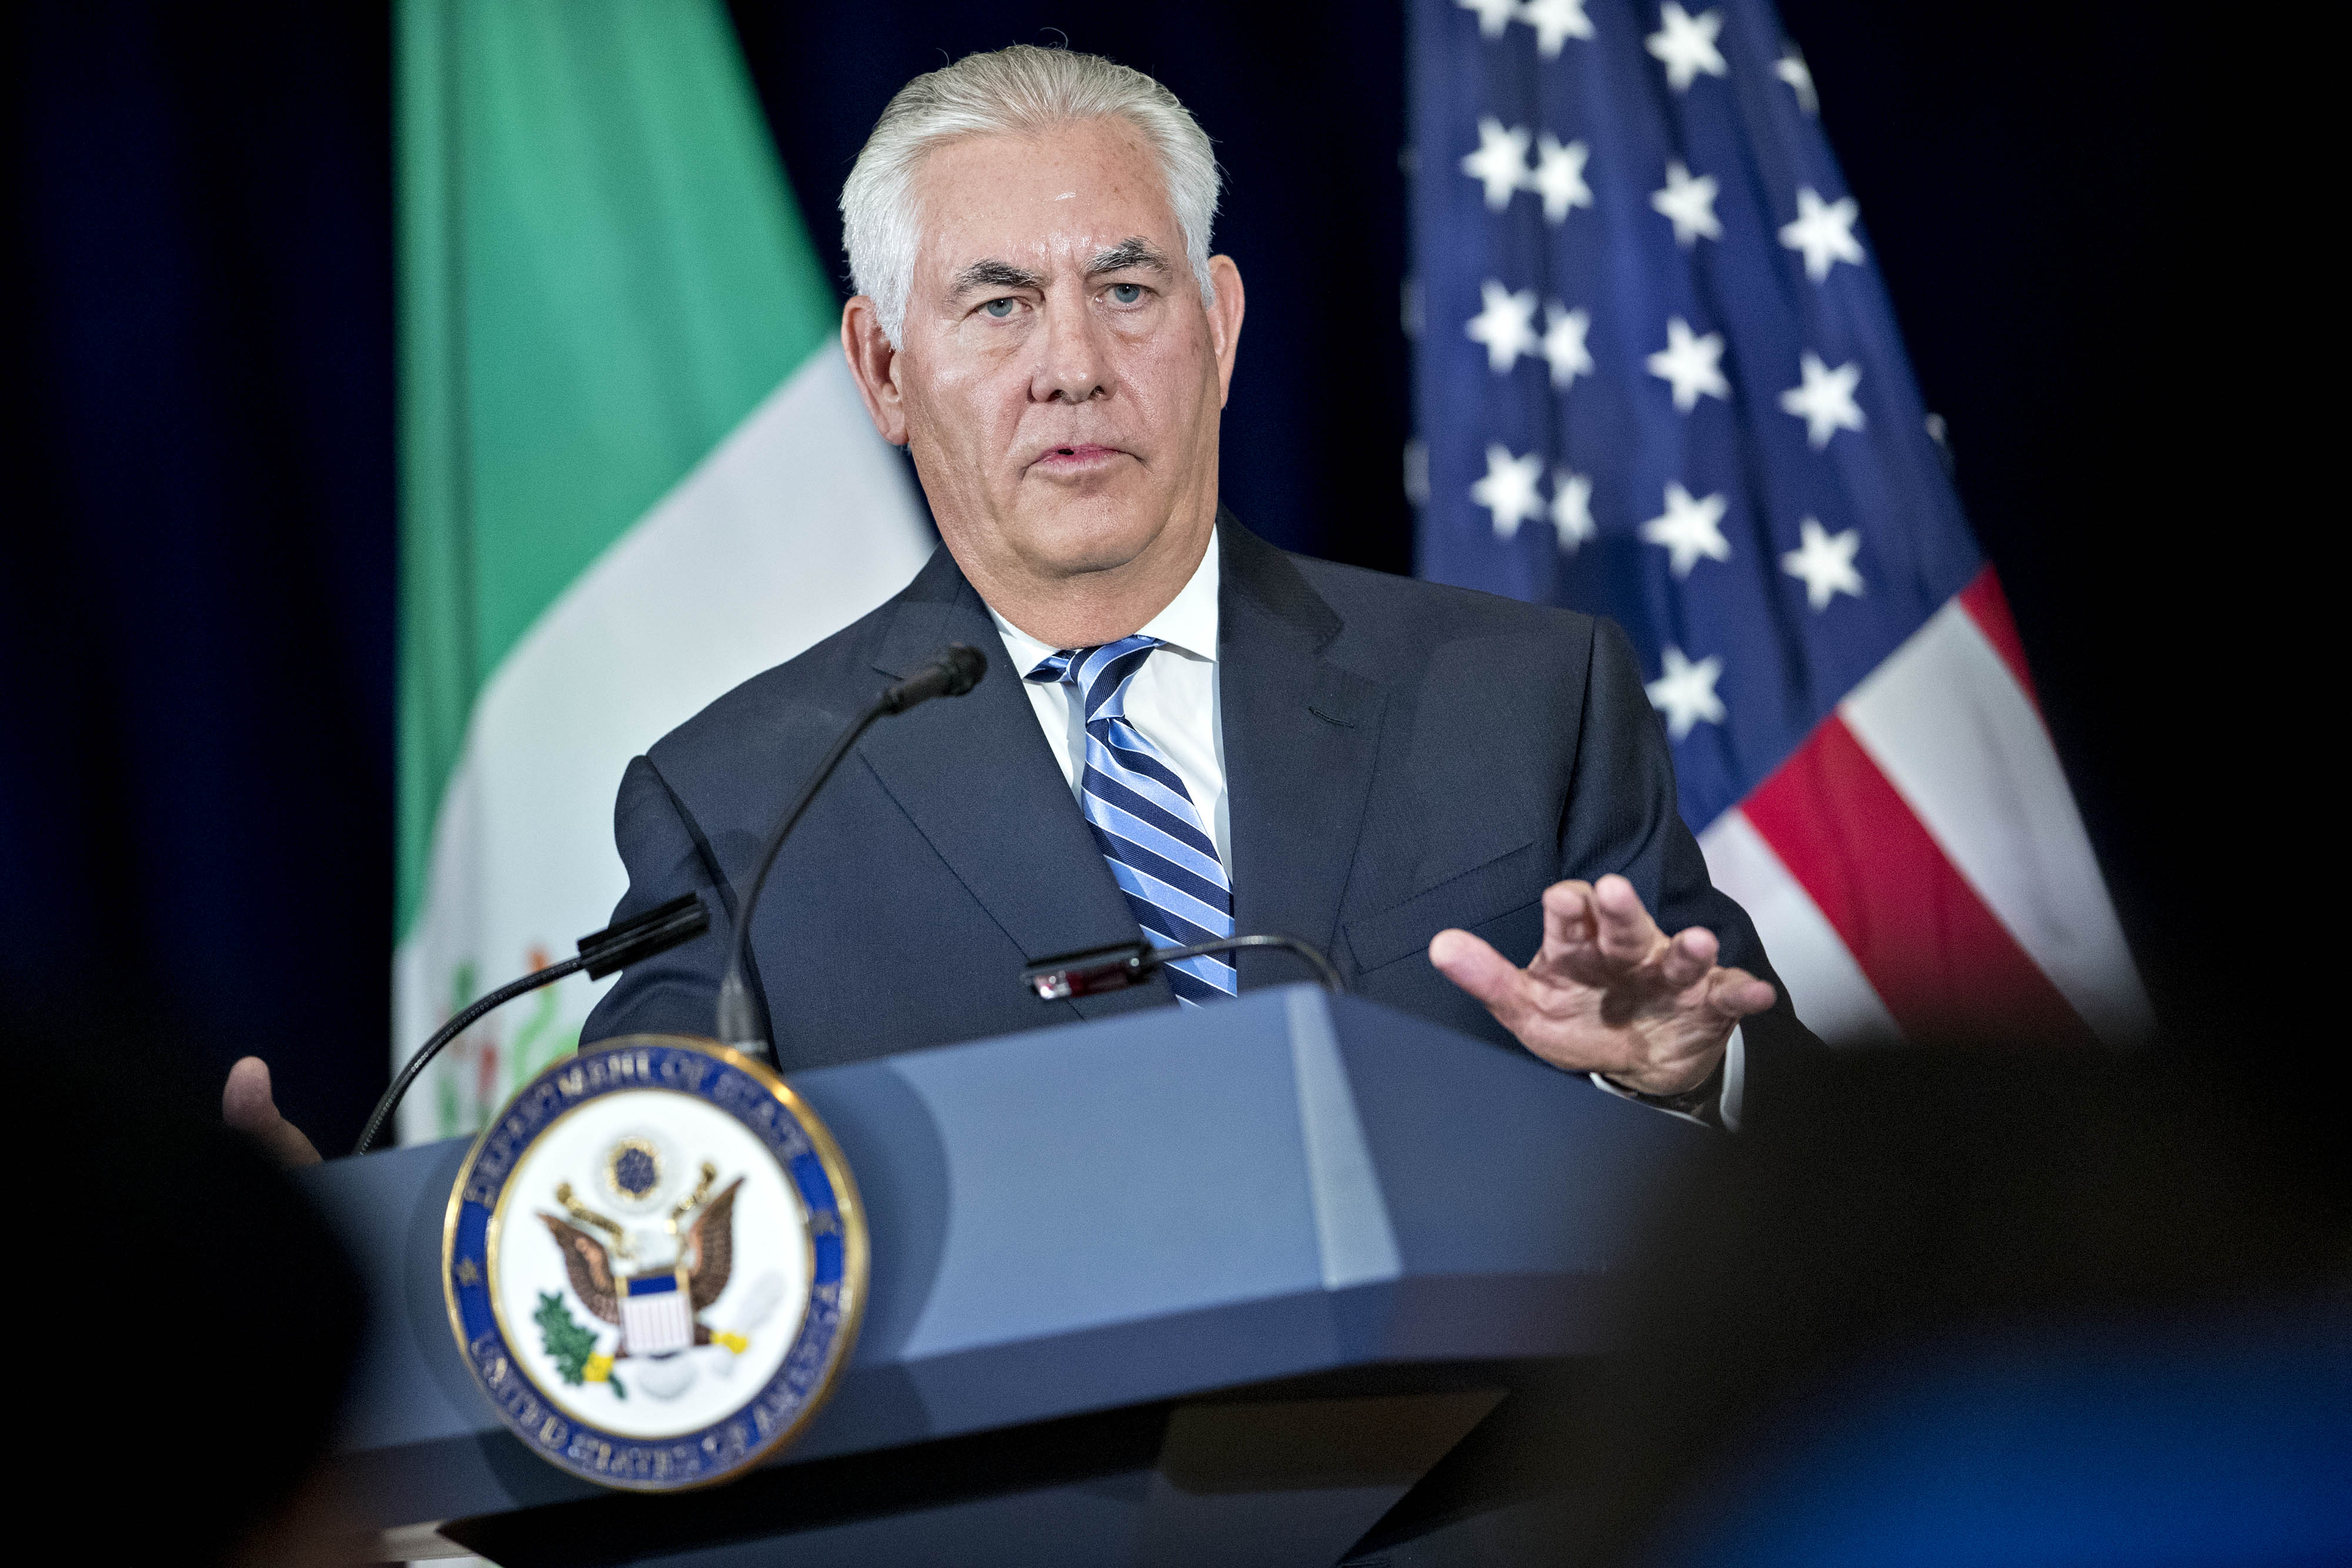 Rex Tillerson, U.S. Secretary of State, speaks during a news conference after a meeting at the State Department in Washington, D.C., U.S., on May 18, 2017. (Andrew Harrer—Bloomberg/Getty Images)